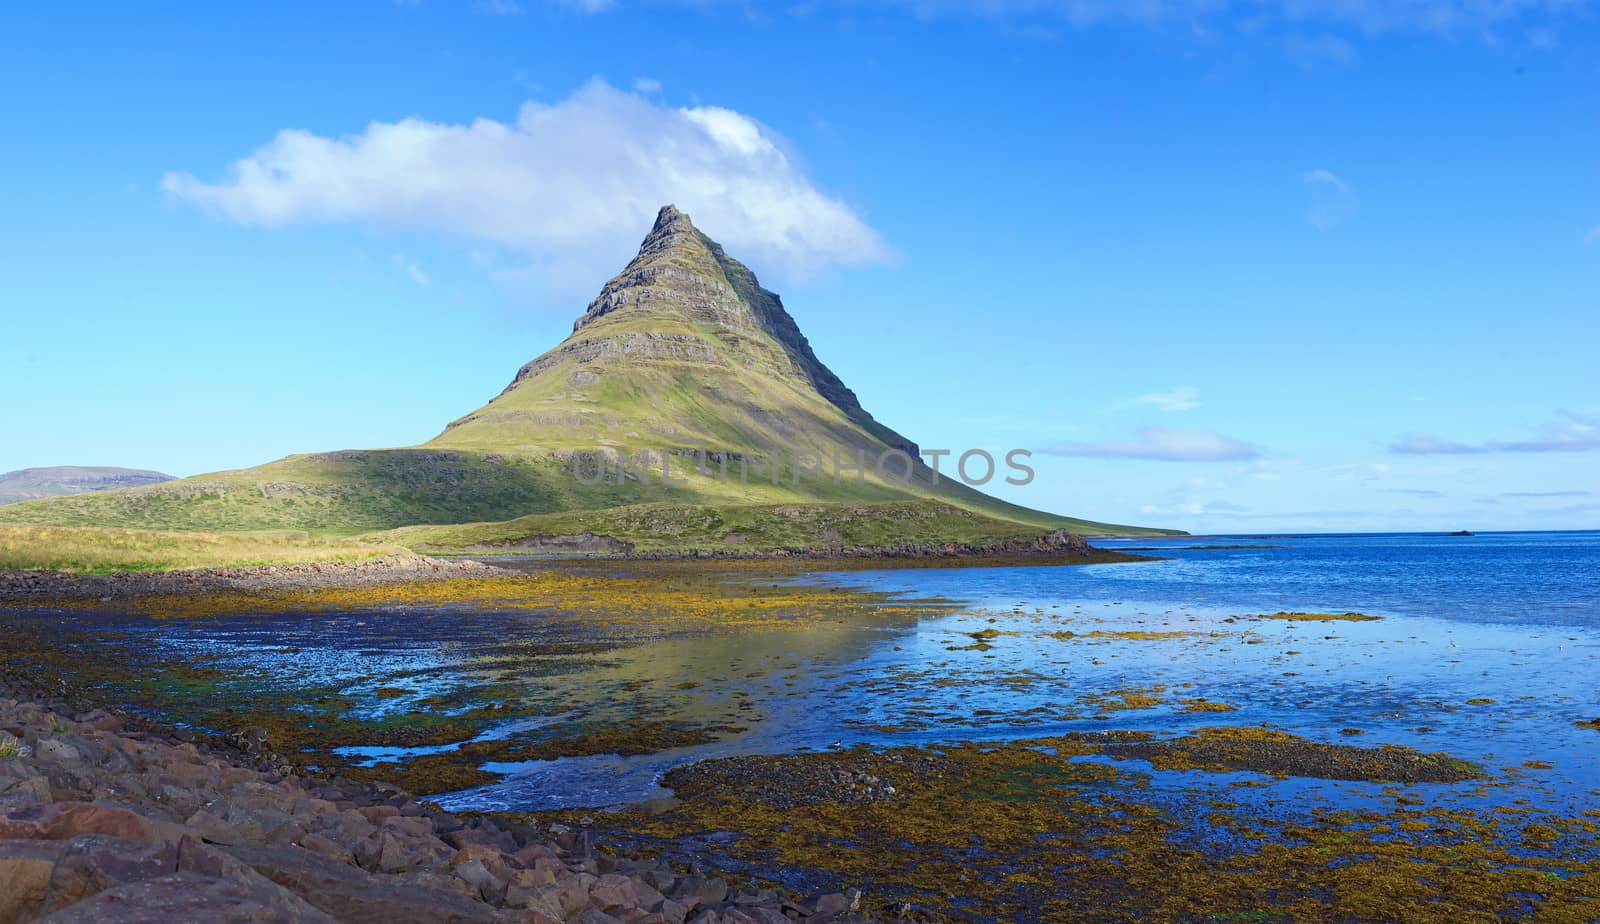 Mount Kirkjufell east face from the village of Grundarfjordur in the peninsula of Snaefellsnes, West Iceland.